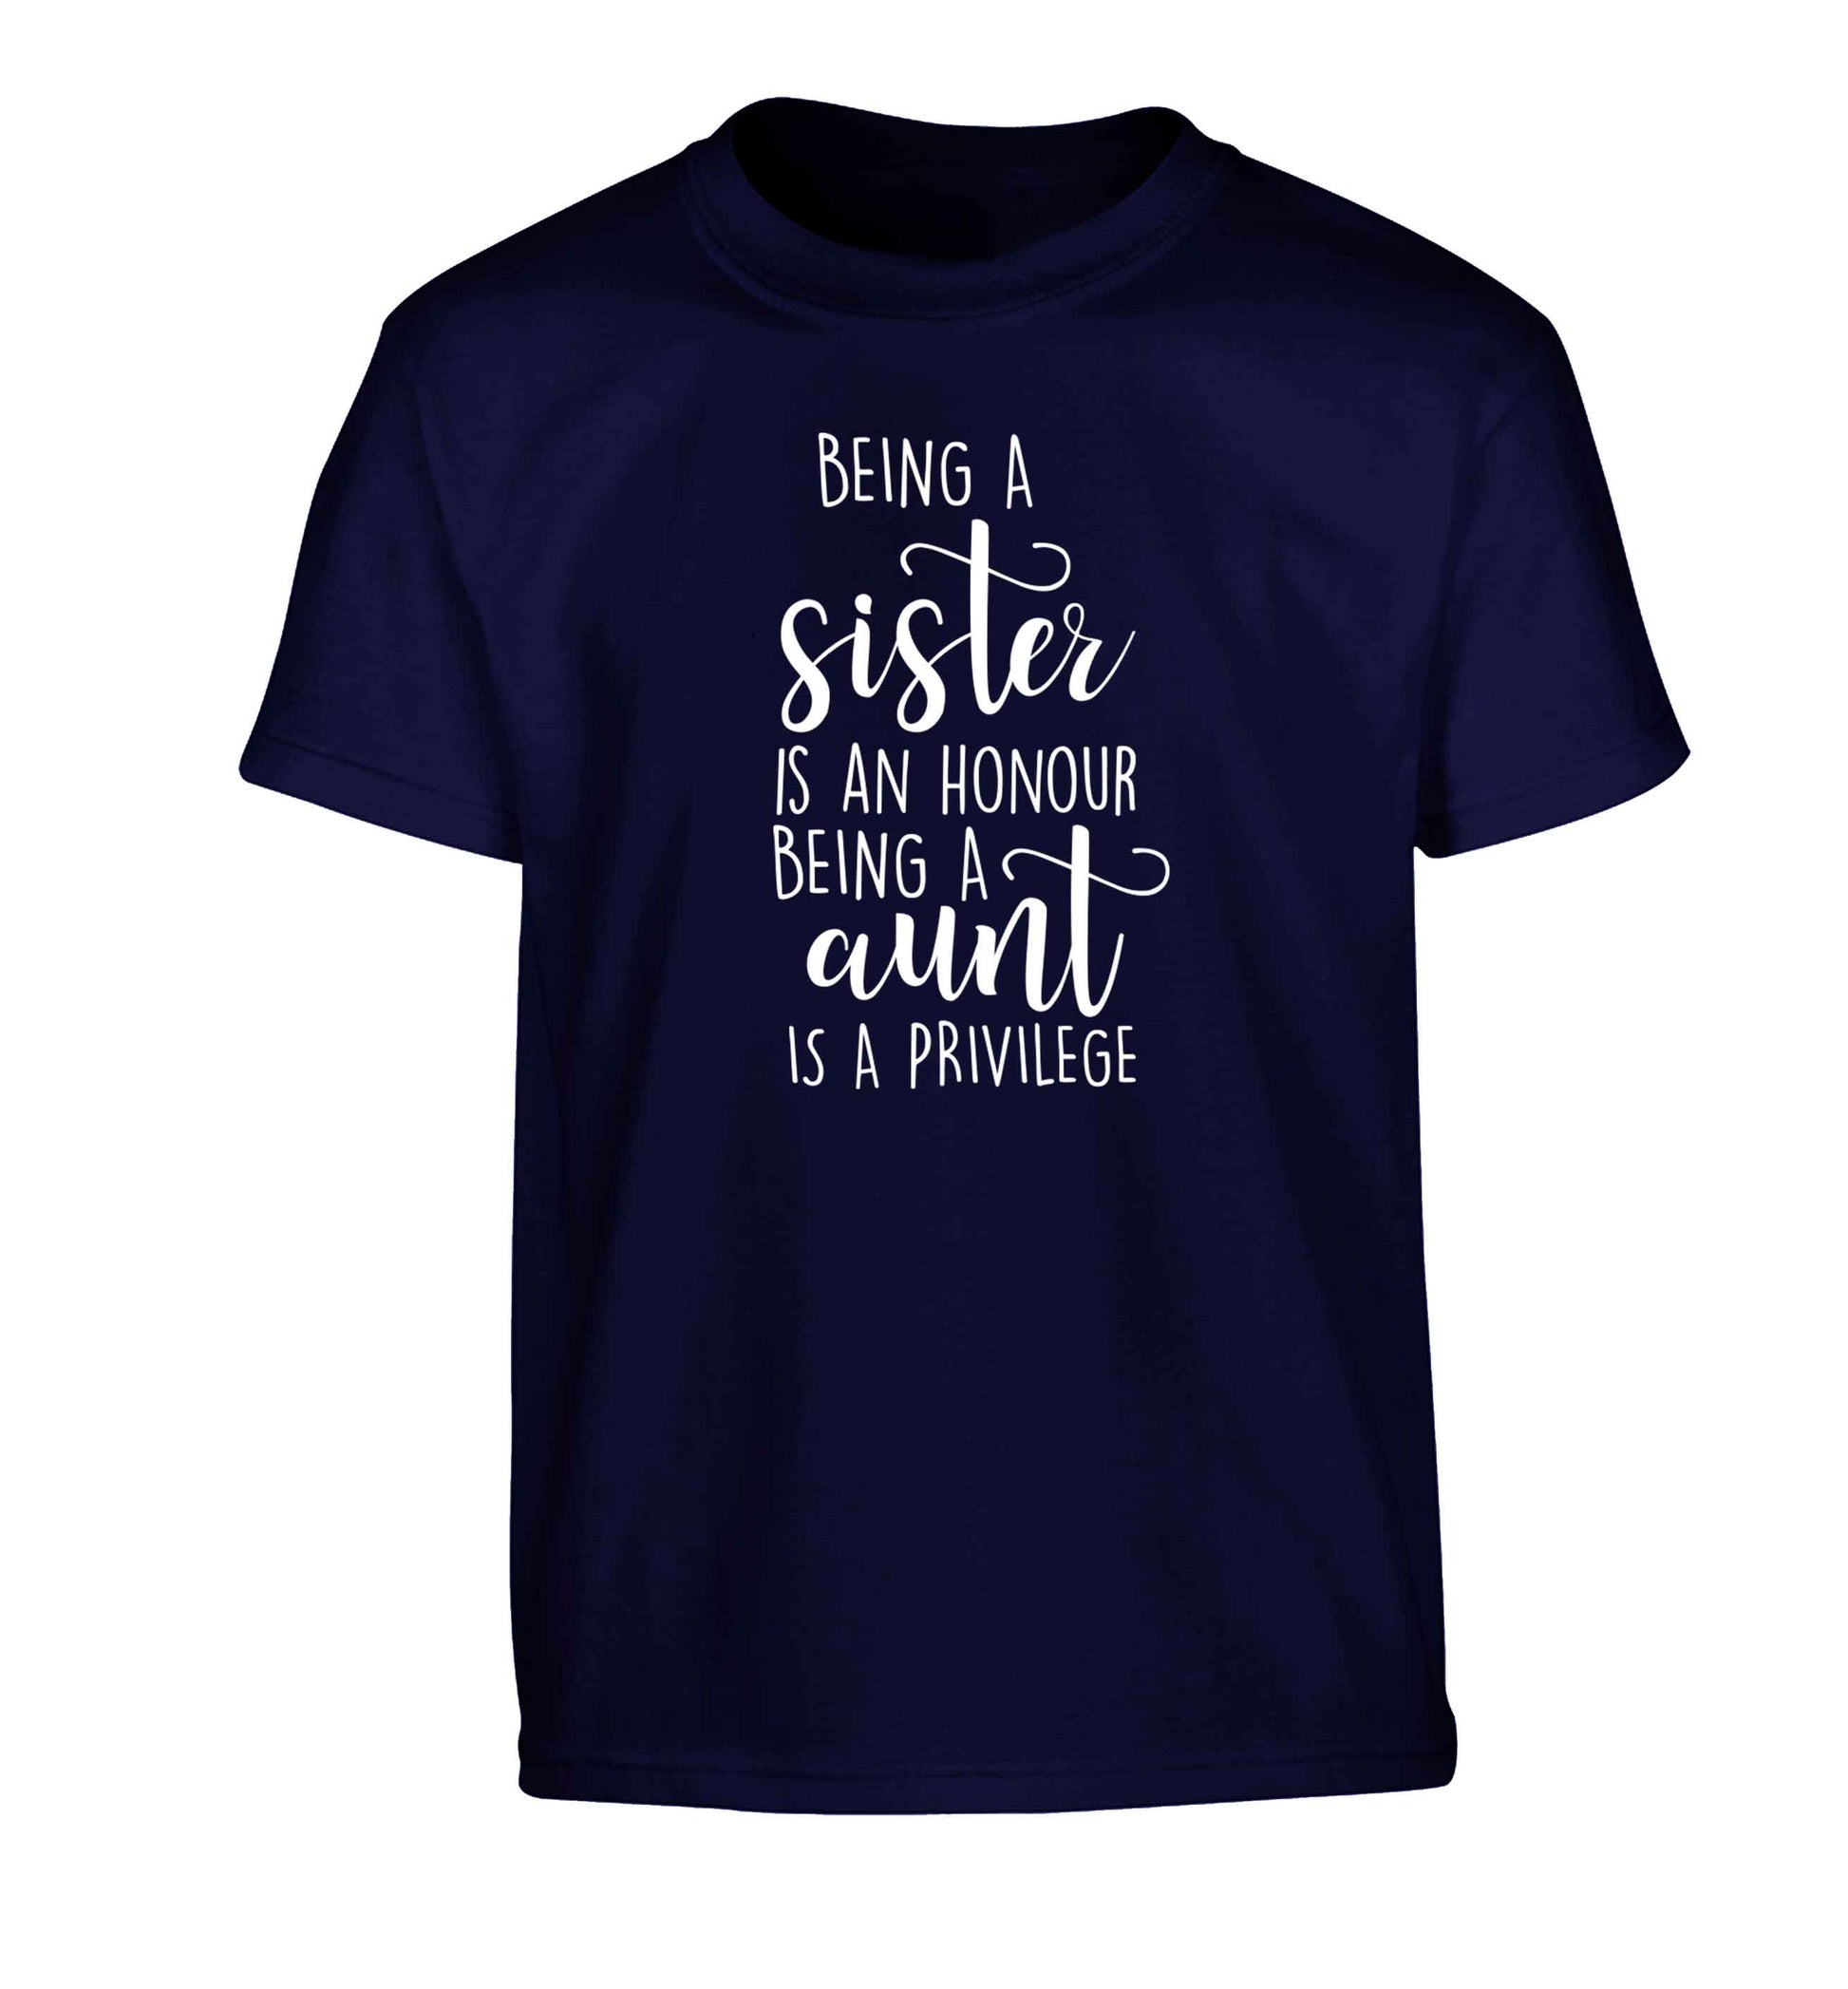 Being a sister is an honour being an auntie is a privilege Children's navy Tshirt 12-13 Years